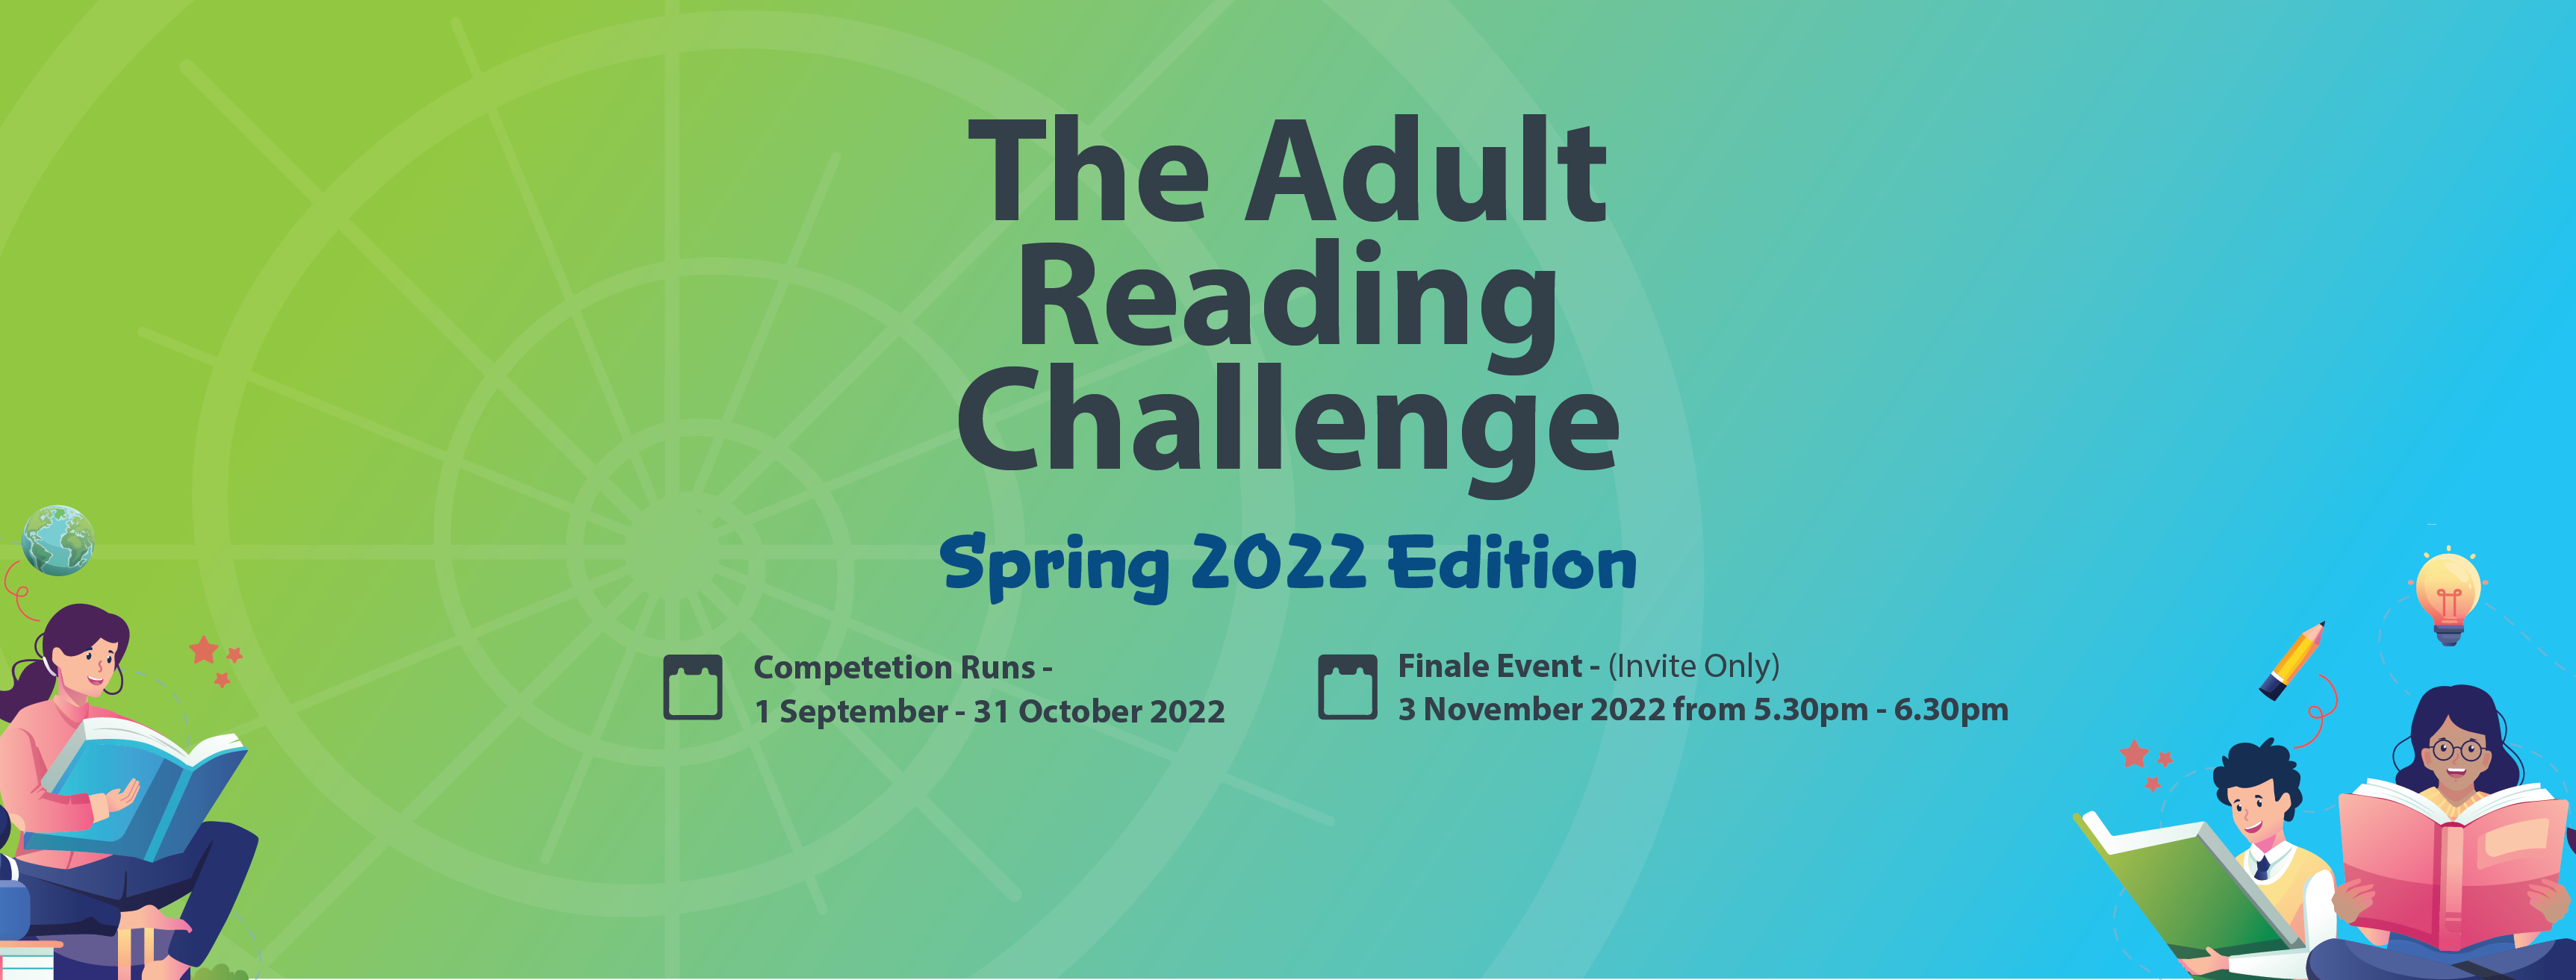 The adult reading challenge spring 2022 edition.